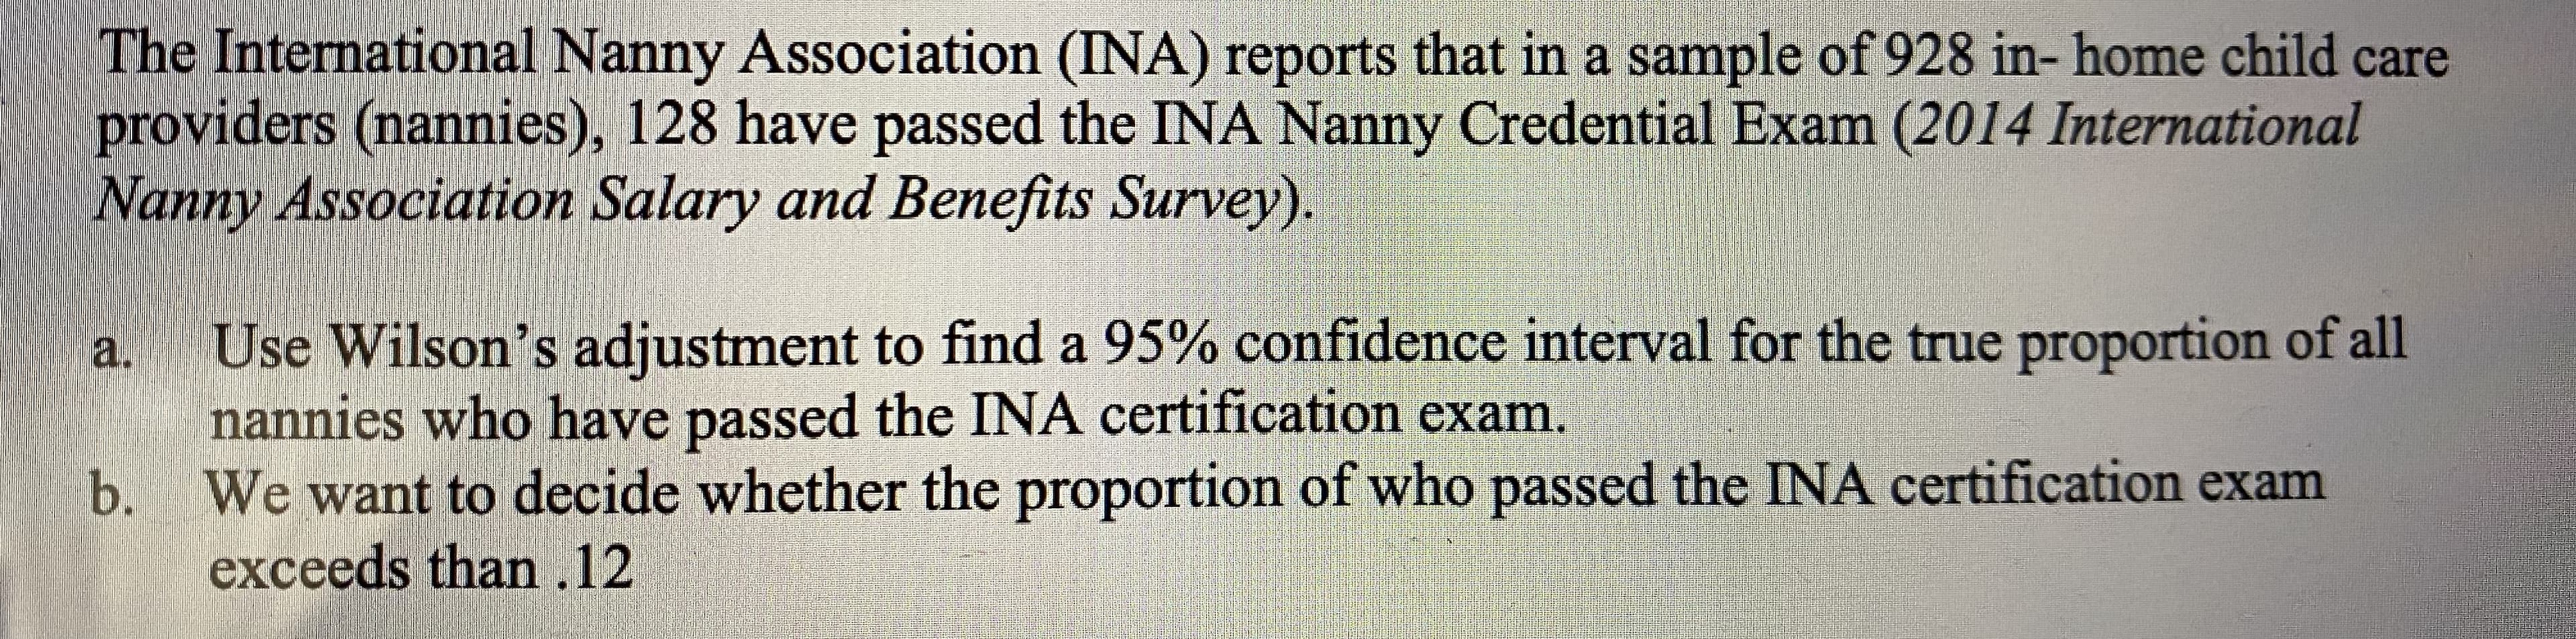 The International Nanny Association (INA) reports that in a sample of 928 in- home child care
providers (nannies), 128 have passed the INA Nanny Credential Exam (2014 International
Nanny Association Salary and Benefits Survey).
Use Wilson's adjustment to find a 95% confidence interval for the true proportion of all
nannies who have passed the INA certification exam.
b. We want to decide whether the proportion of who passed the INA certification exam
exceeds than .12
a.
